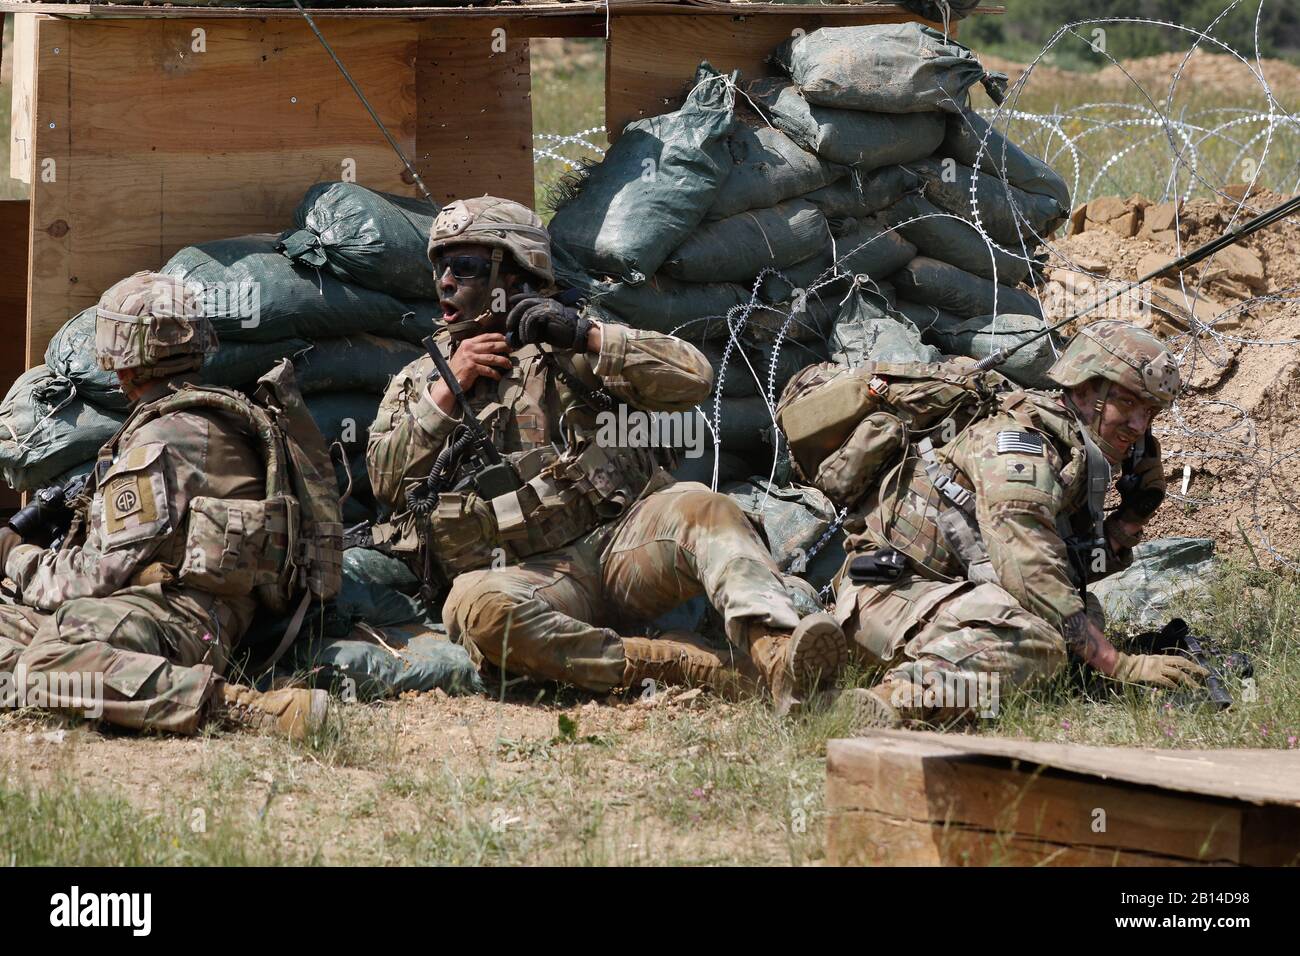 U.S. Army paratroopers assigned to the 2nd Brigade Combat Team, 82nd Airborne Division, call for fire during a combined arms live fire excercise in support of Swift Response 19 in Novo Selo Training Area, Bulgaria, June 22, 2019. Swift Response 19 is a U.S. Army Europe multinational exercise led by the U.S. Global Response Force to demonstrate the ability to deploy high readiness forces into a designated area, as well as advance airborne interoperability among NATO allies. (U.S. Army photo by Spc. Justin W. Stafford) Stock Photo